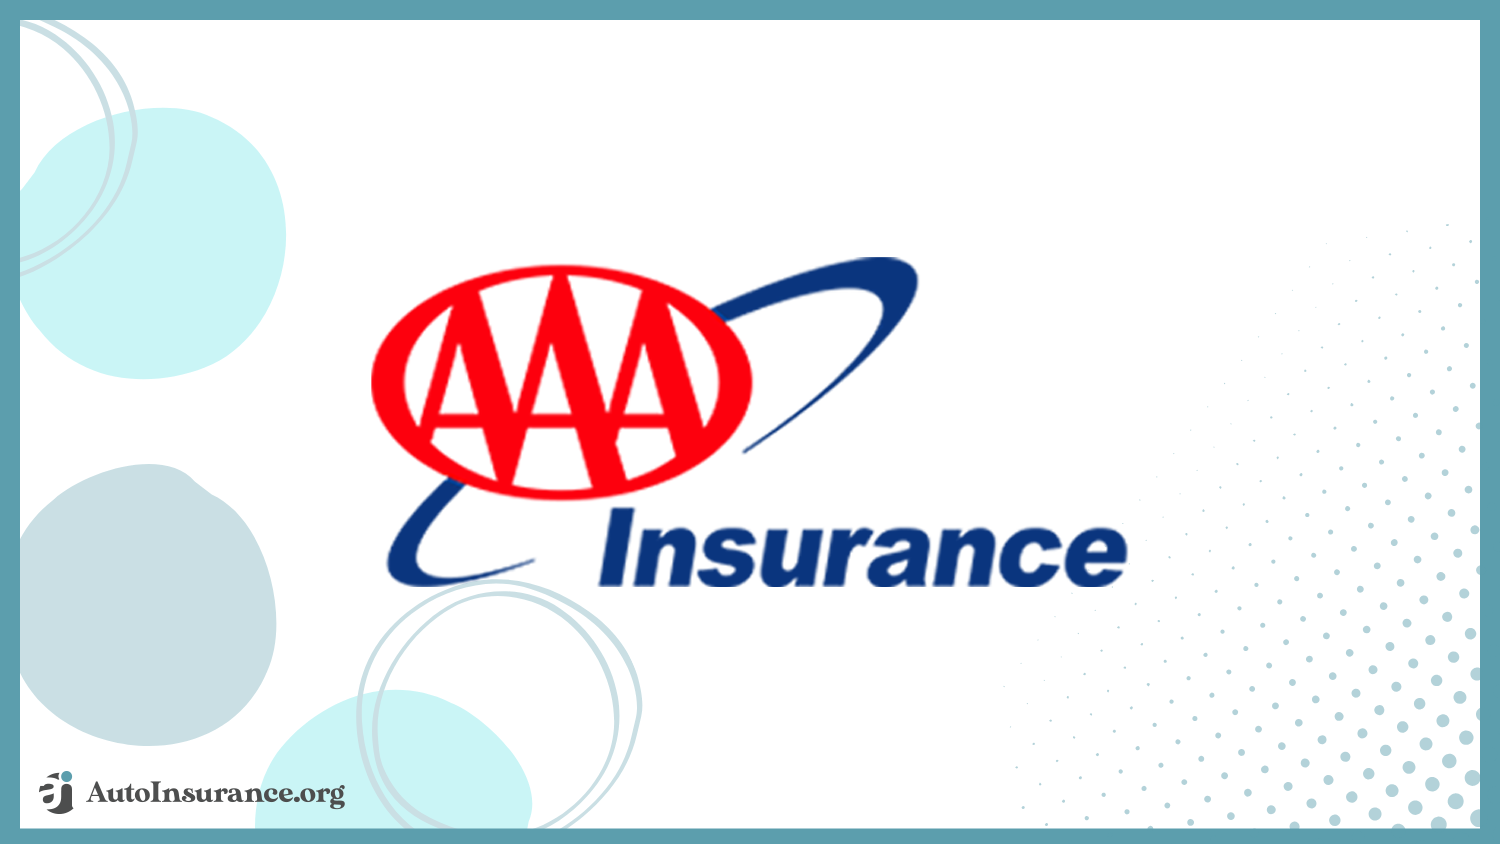 AAA: Best Auto Insurance for Undocumented Immigrants